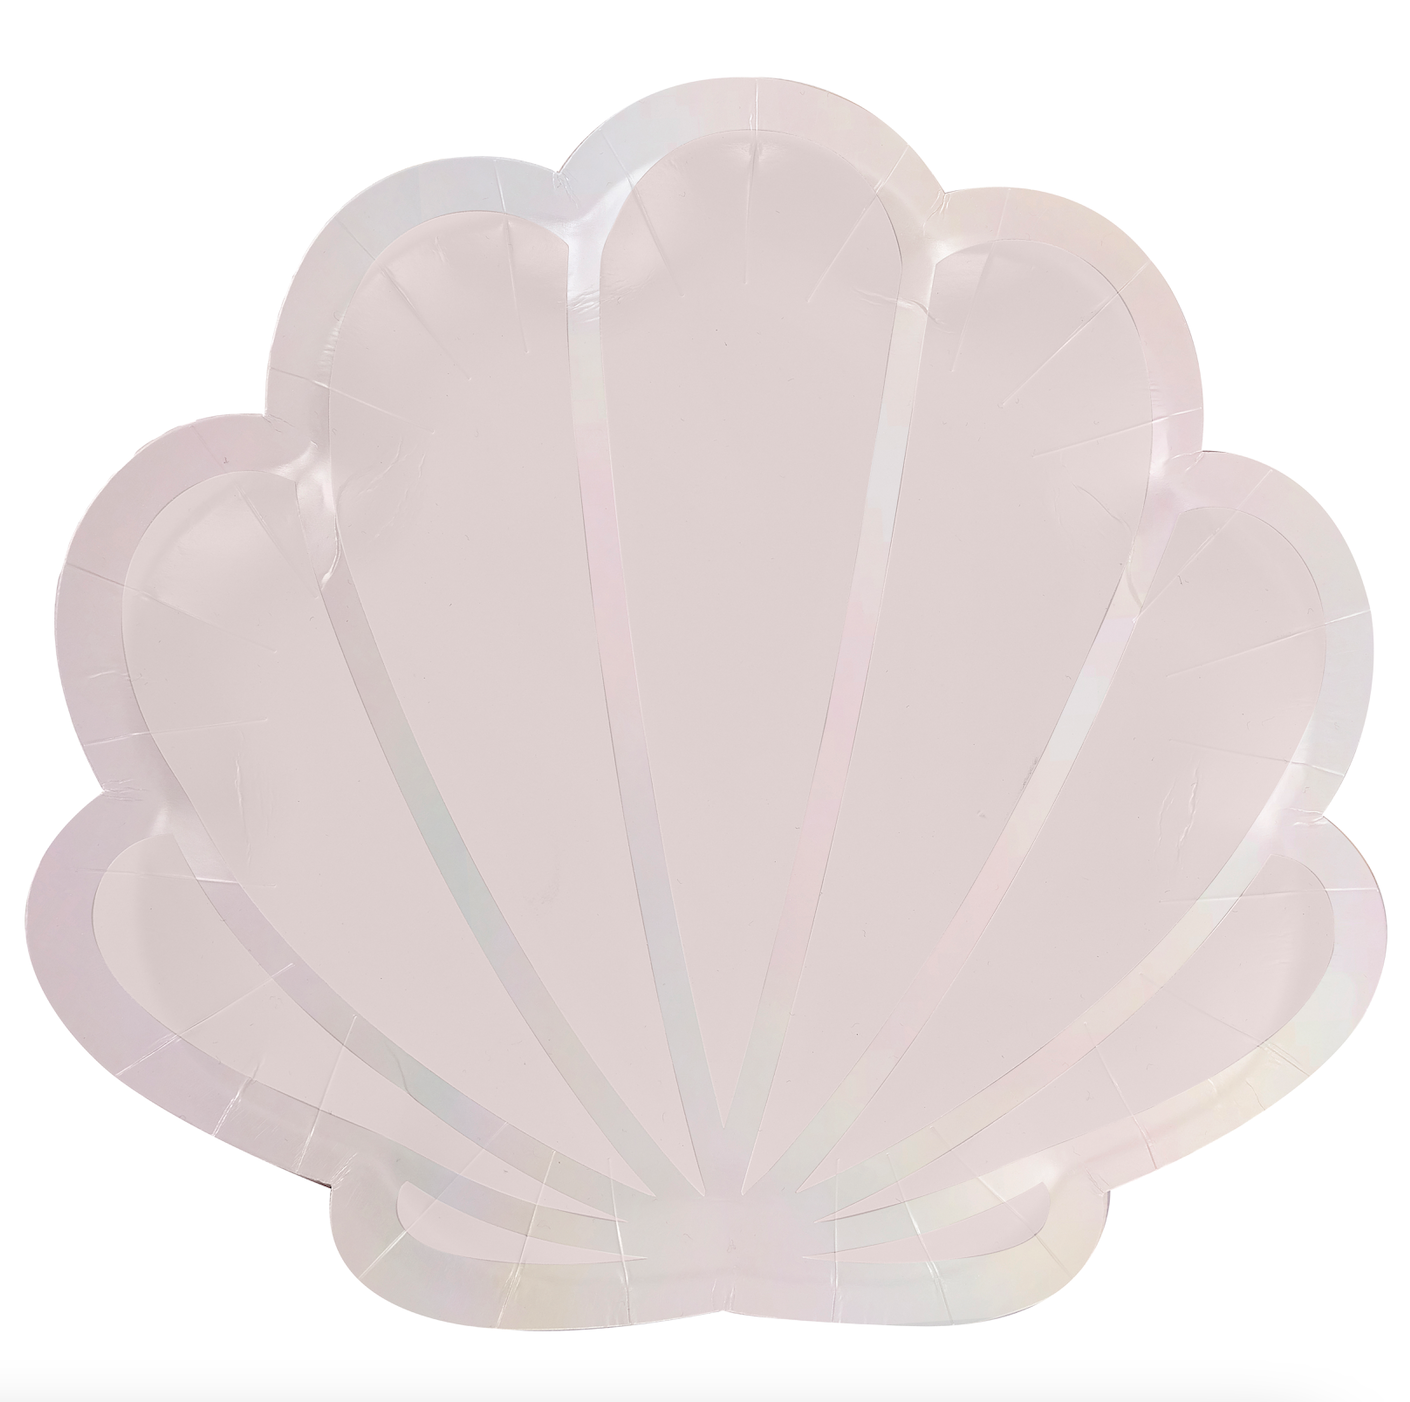 Iridescent & Pink Mermaid Shell Shaped Paper Plates